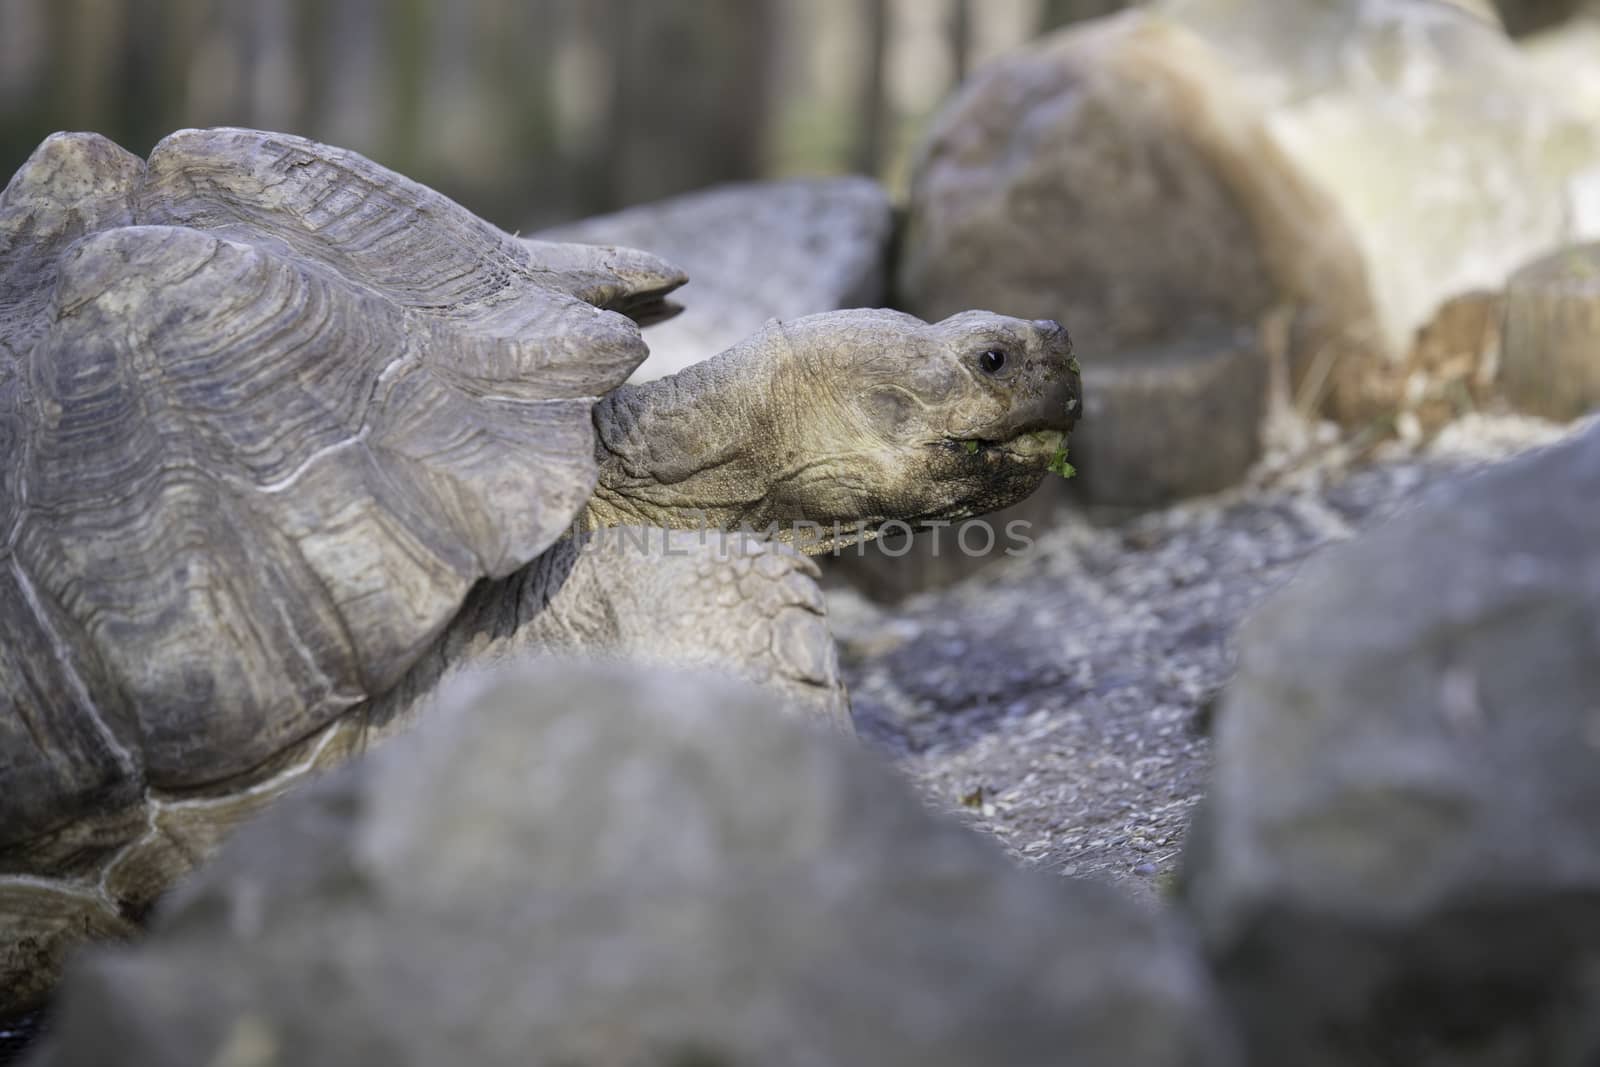 African spurred tortoise, close up head